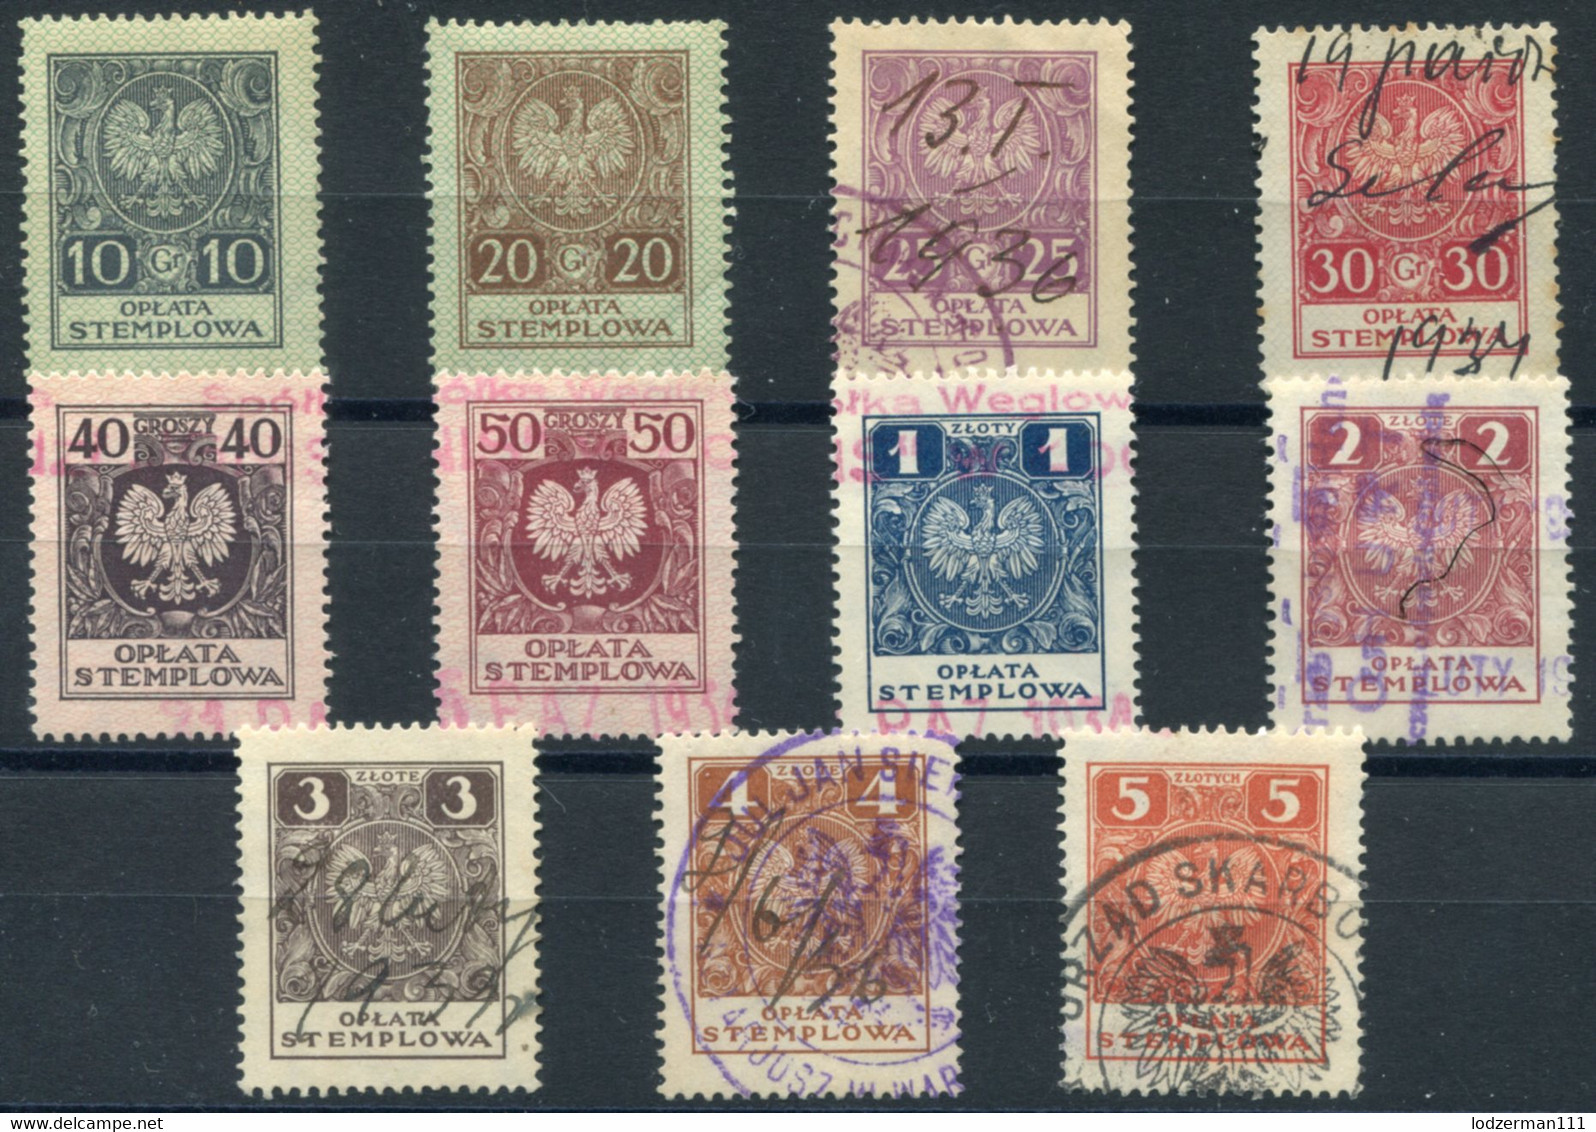 1932 General Zloty Issue #100-110 Compl. Set Used (2 MNH) All VF - Revenue Stamps